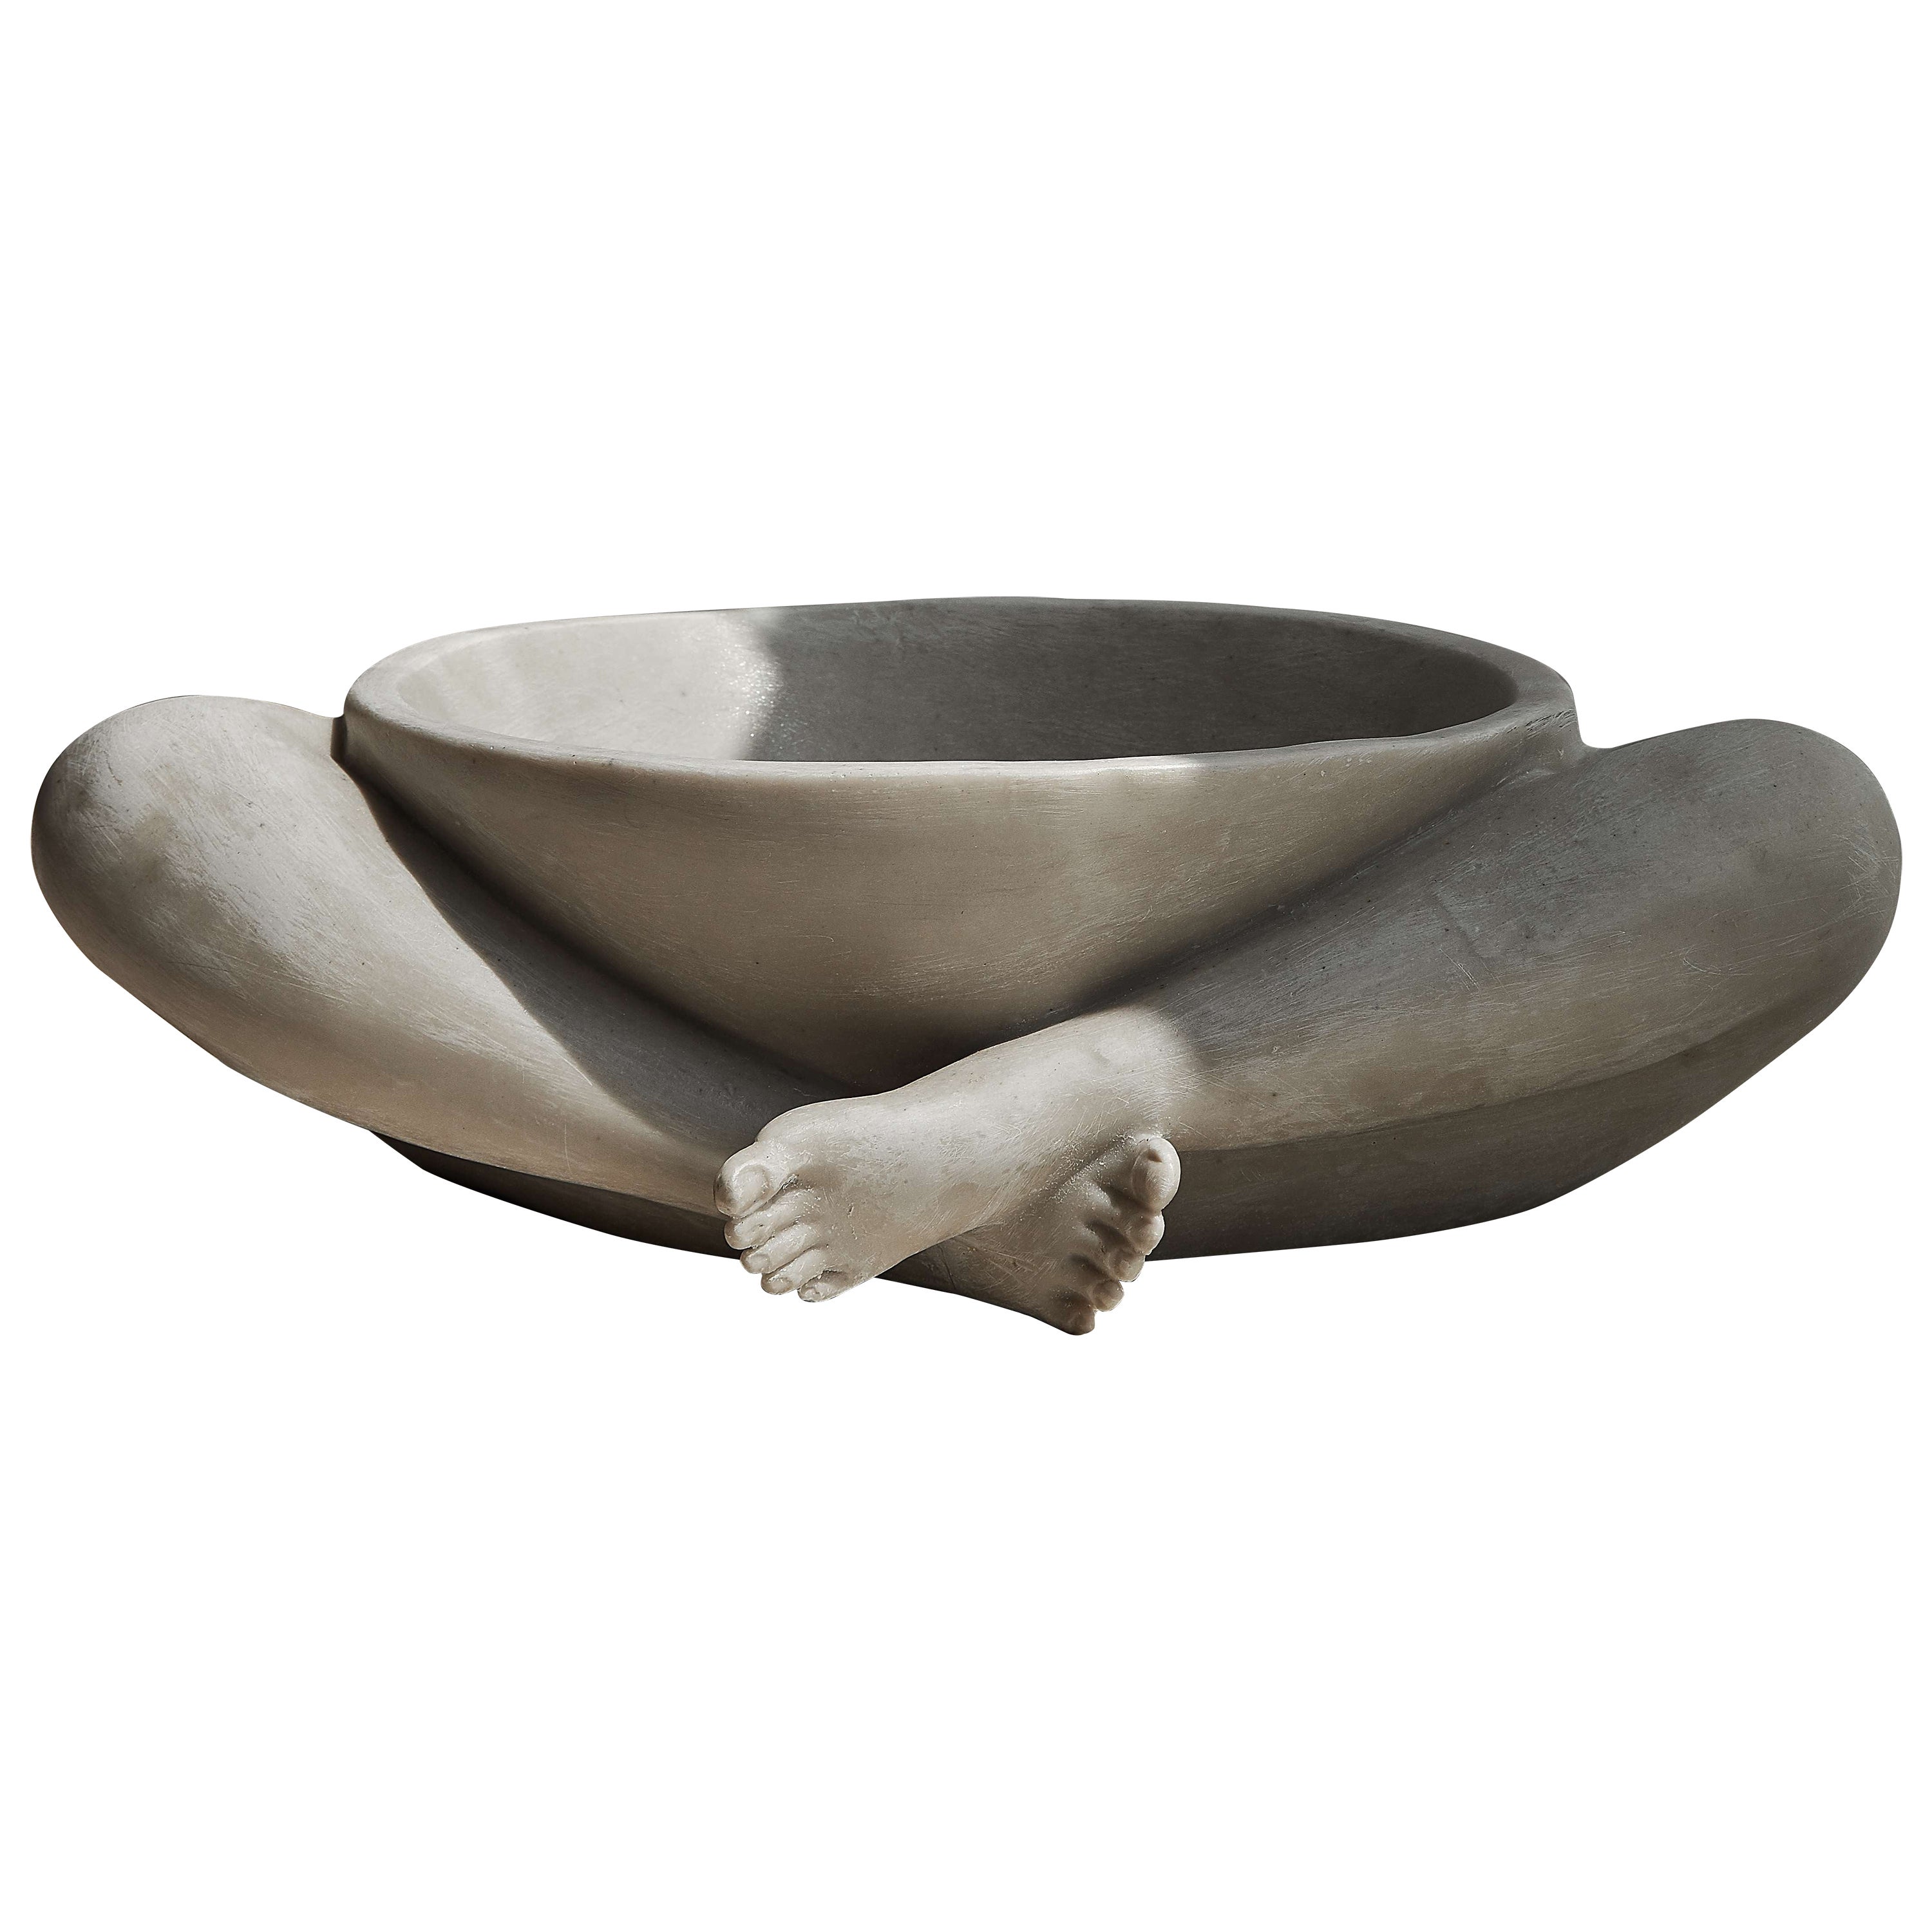 Meditative Pose Sculptural Legs Bowl Sukhasana II in Hand-Crafted Resin + Stone